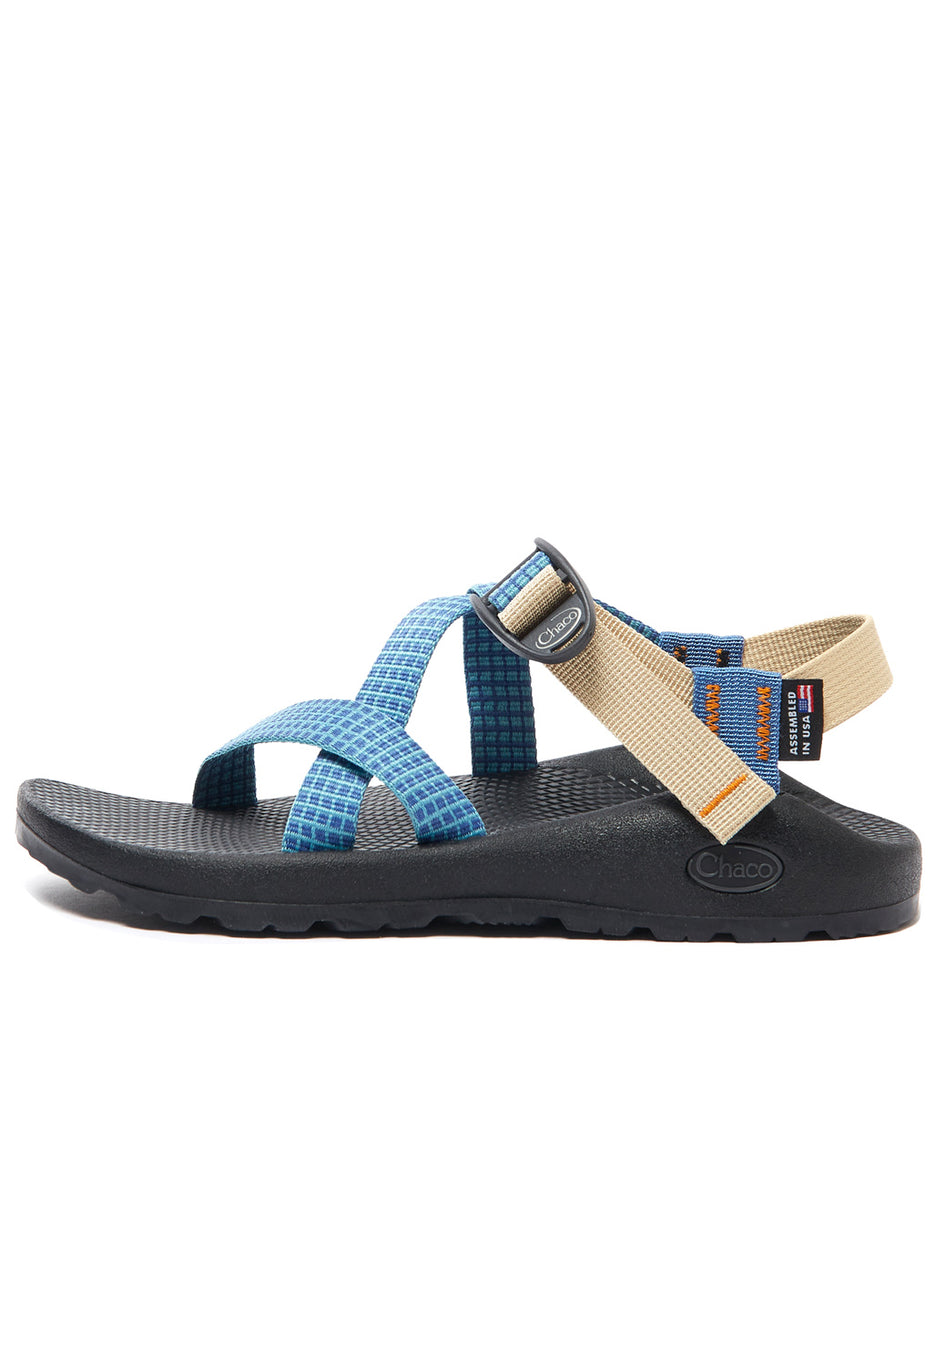 Chaco X Outsiders Z1 Classic Women's Sandals 2